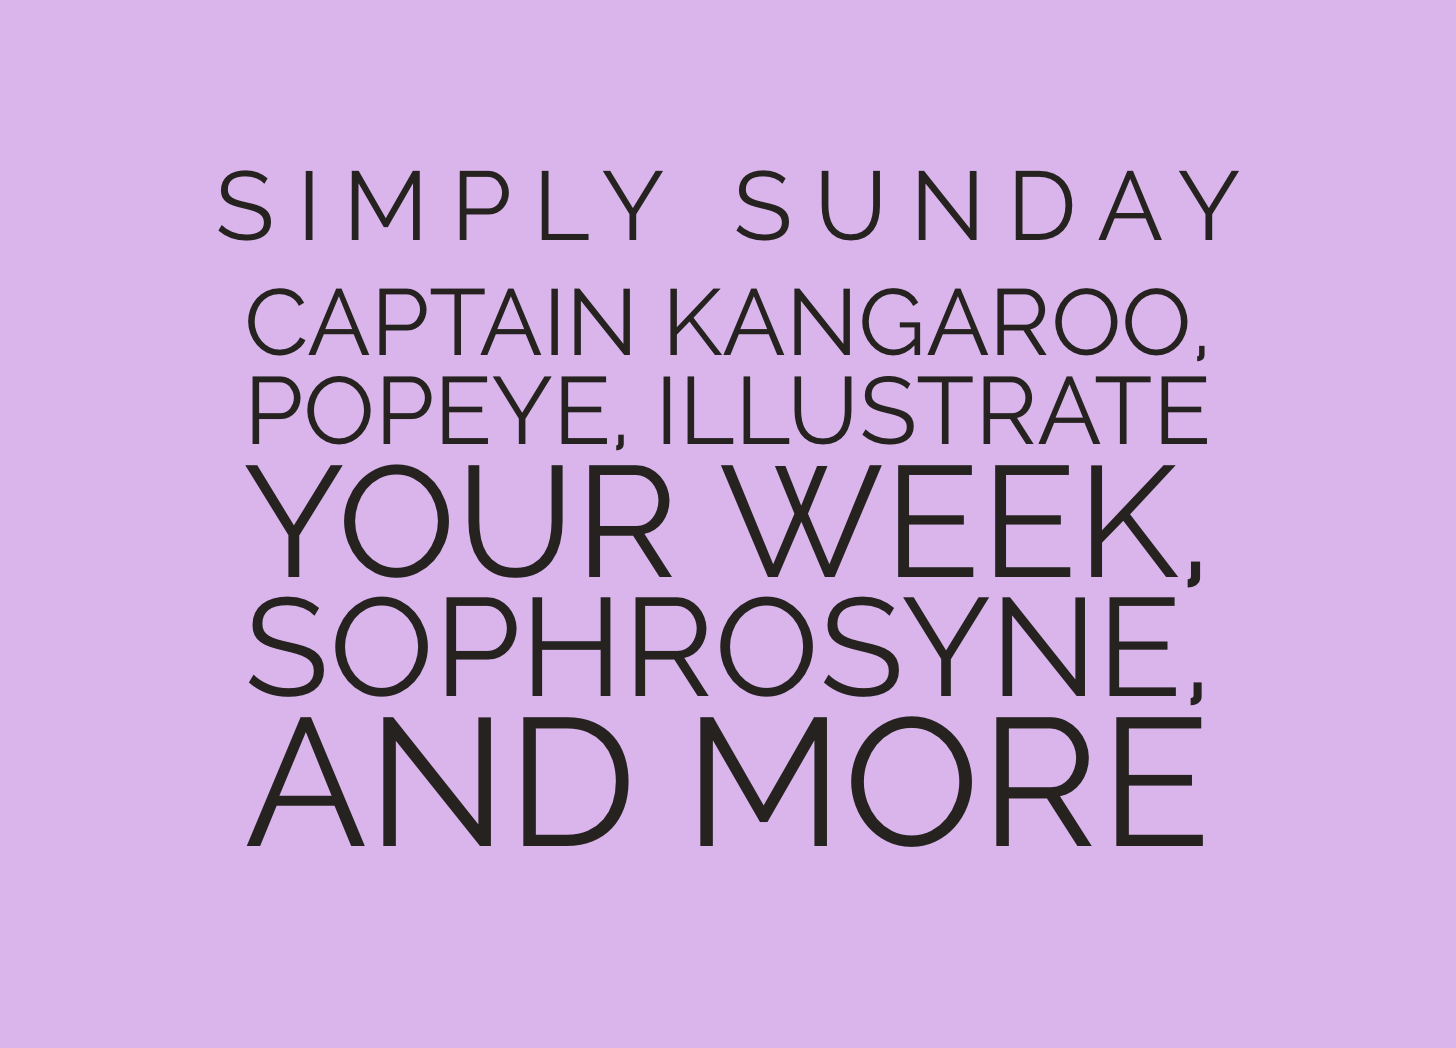 Simply Sunday: Captain Kangaroo, Popeye, Illustrate Your Week, Sophrosyne, and More